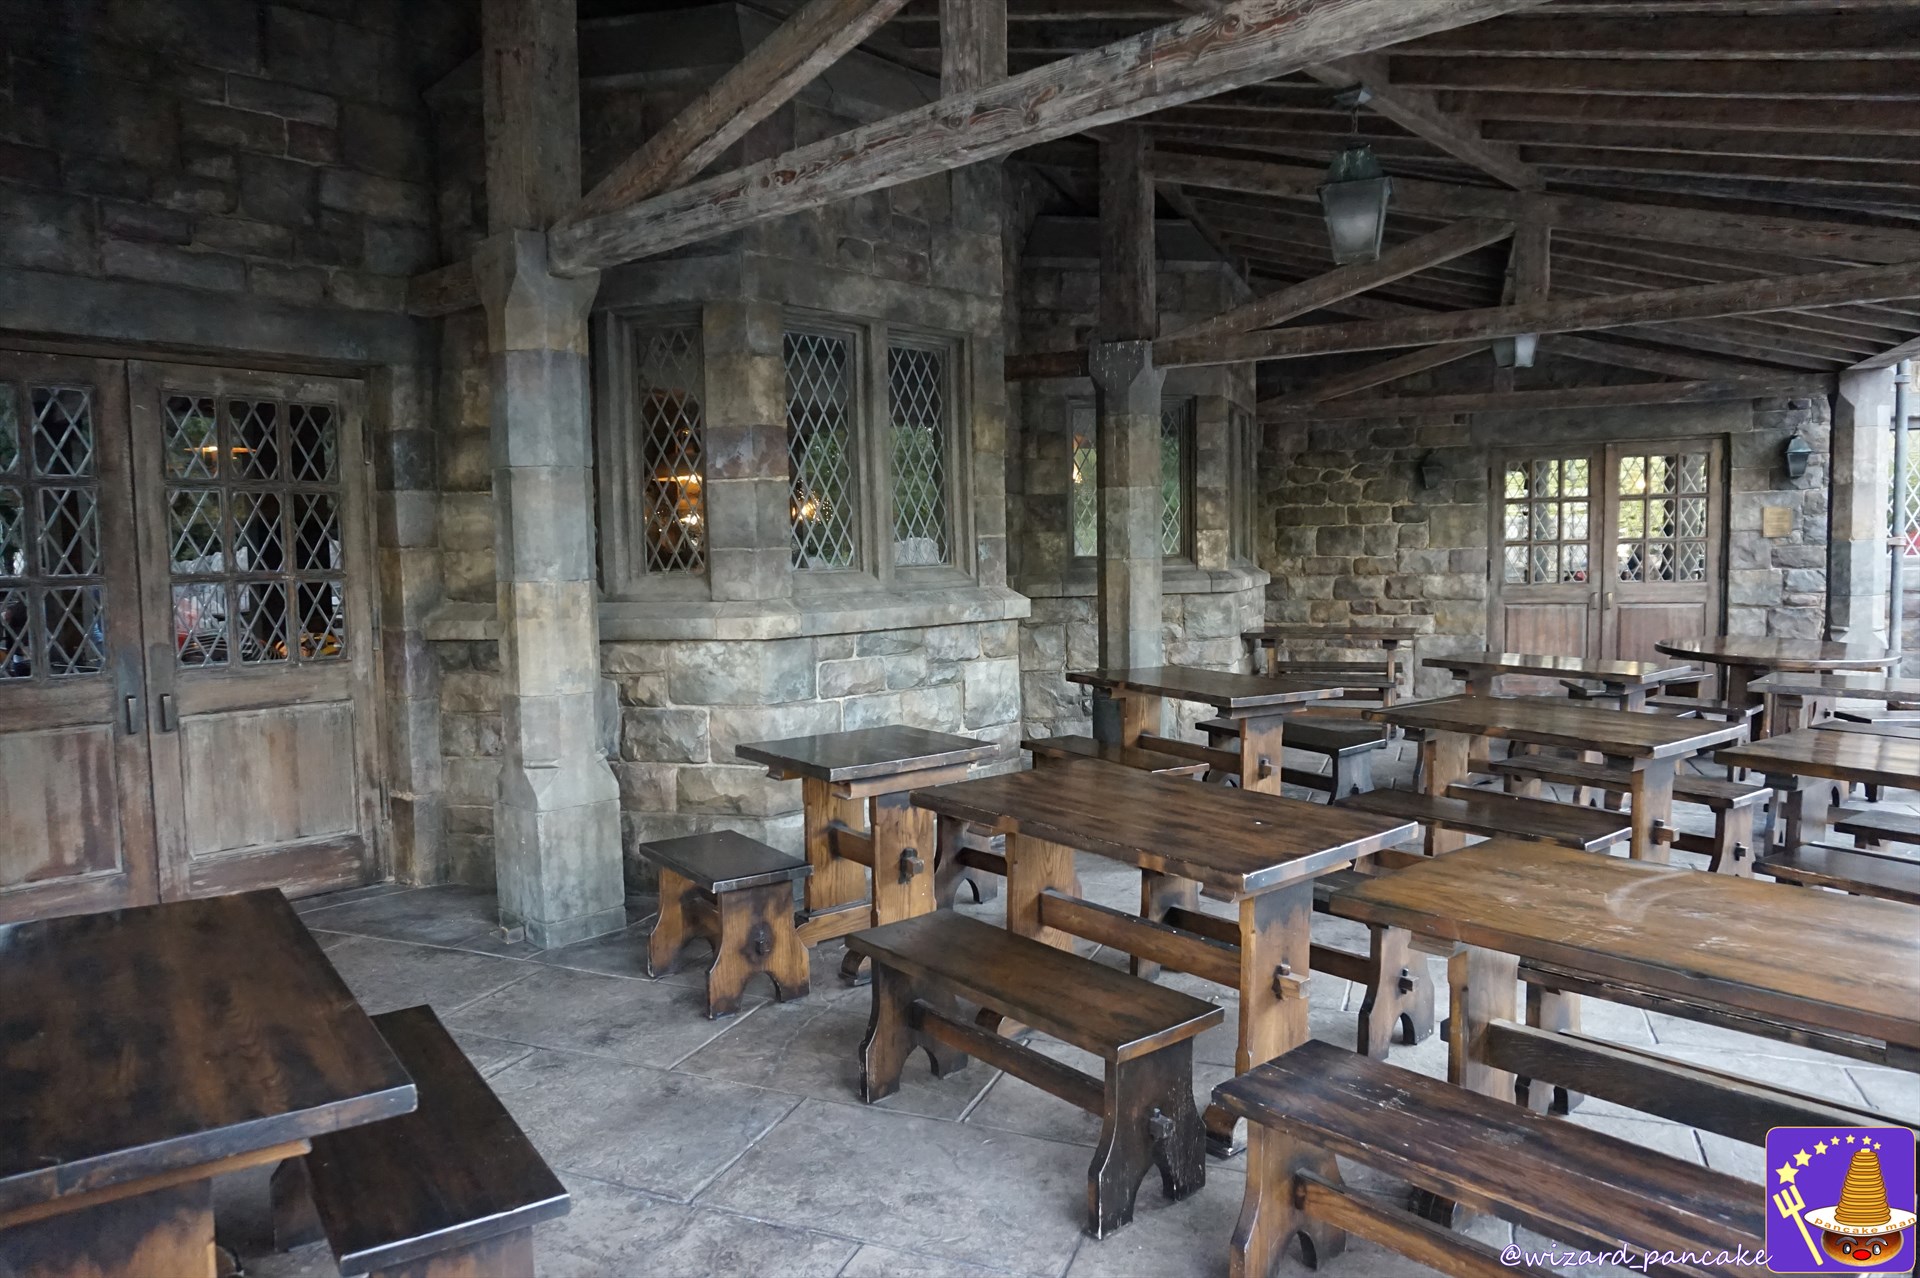 The tables and chairs on the Three Broomsticks terrace look like Hogwarts Great Hall (you can feel like Harry and his friends).